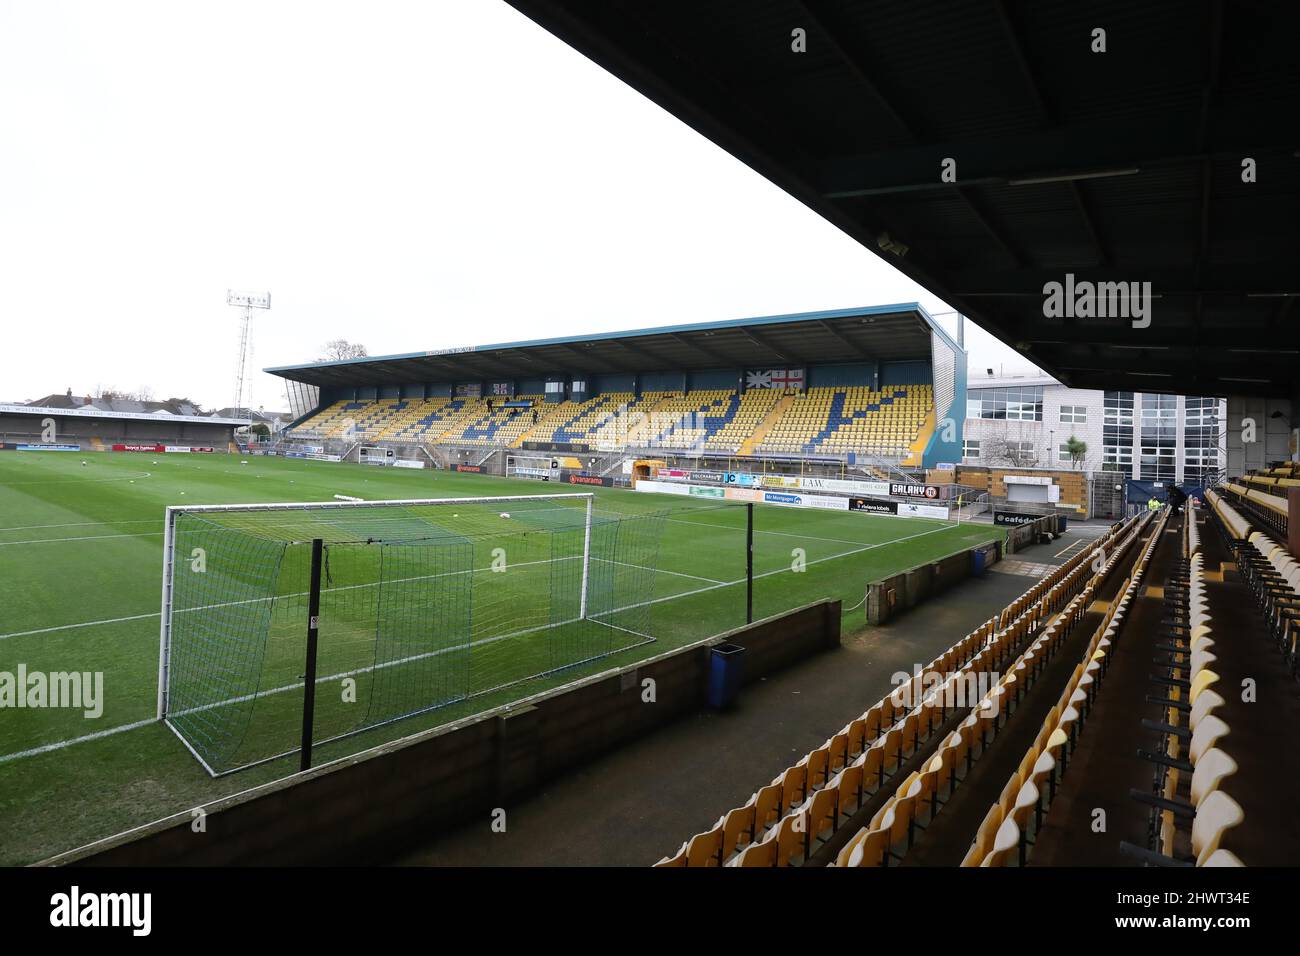 General view of the  First round of the Emirates FA Cup between Torquay United and Crawley Town at Plainmoor, Torquay.  08 November 2020 Stock Photo